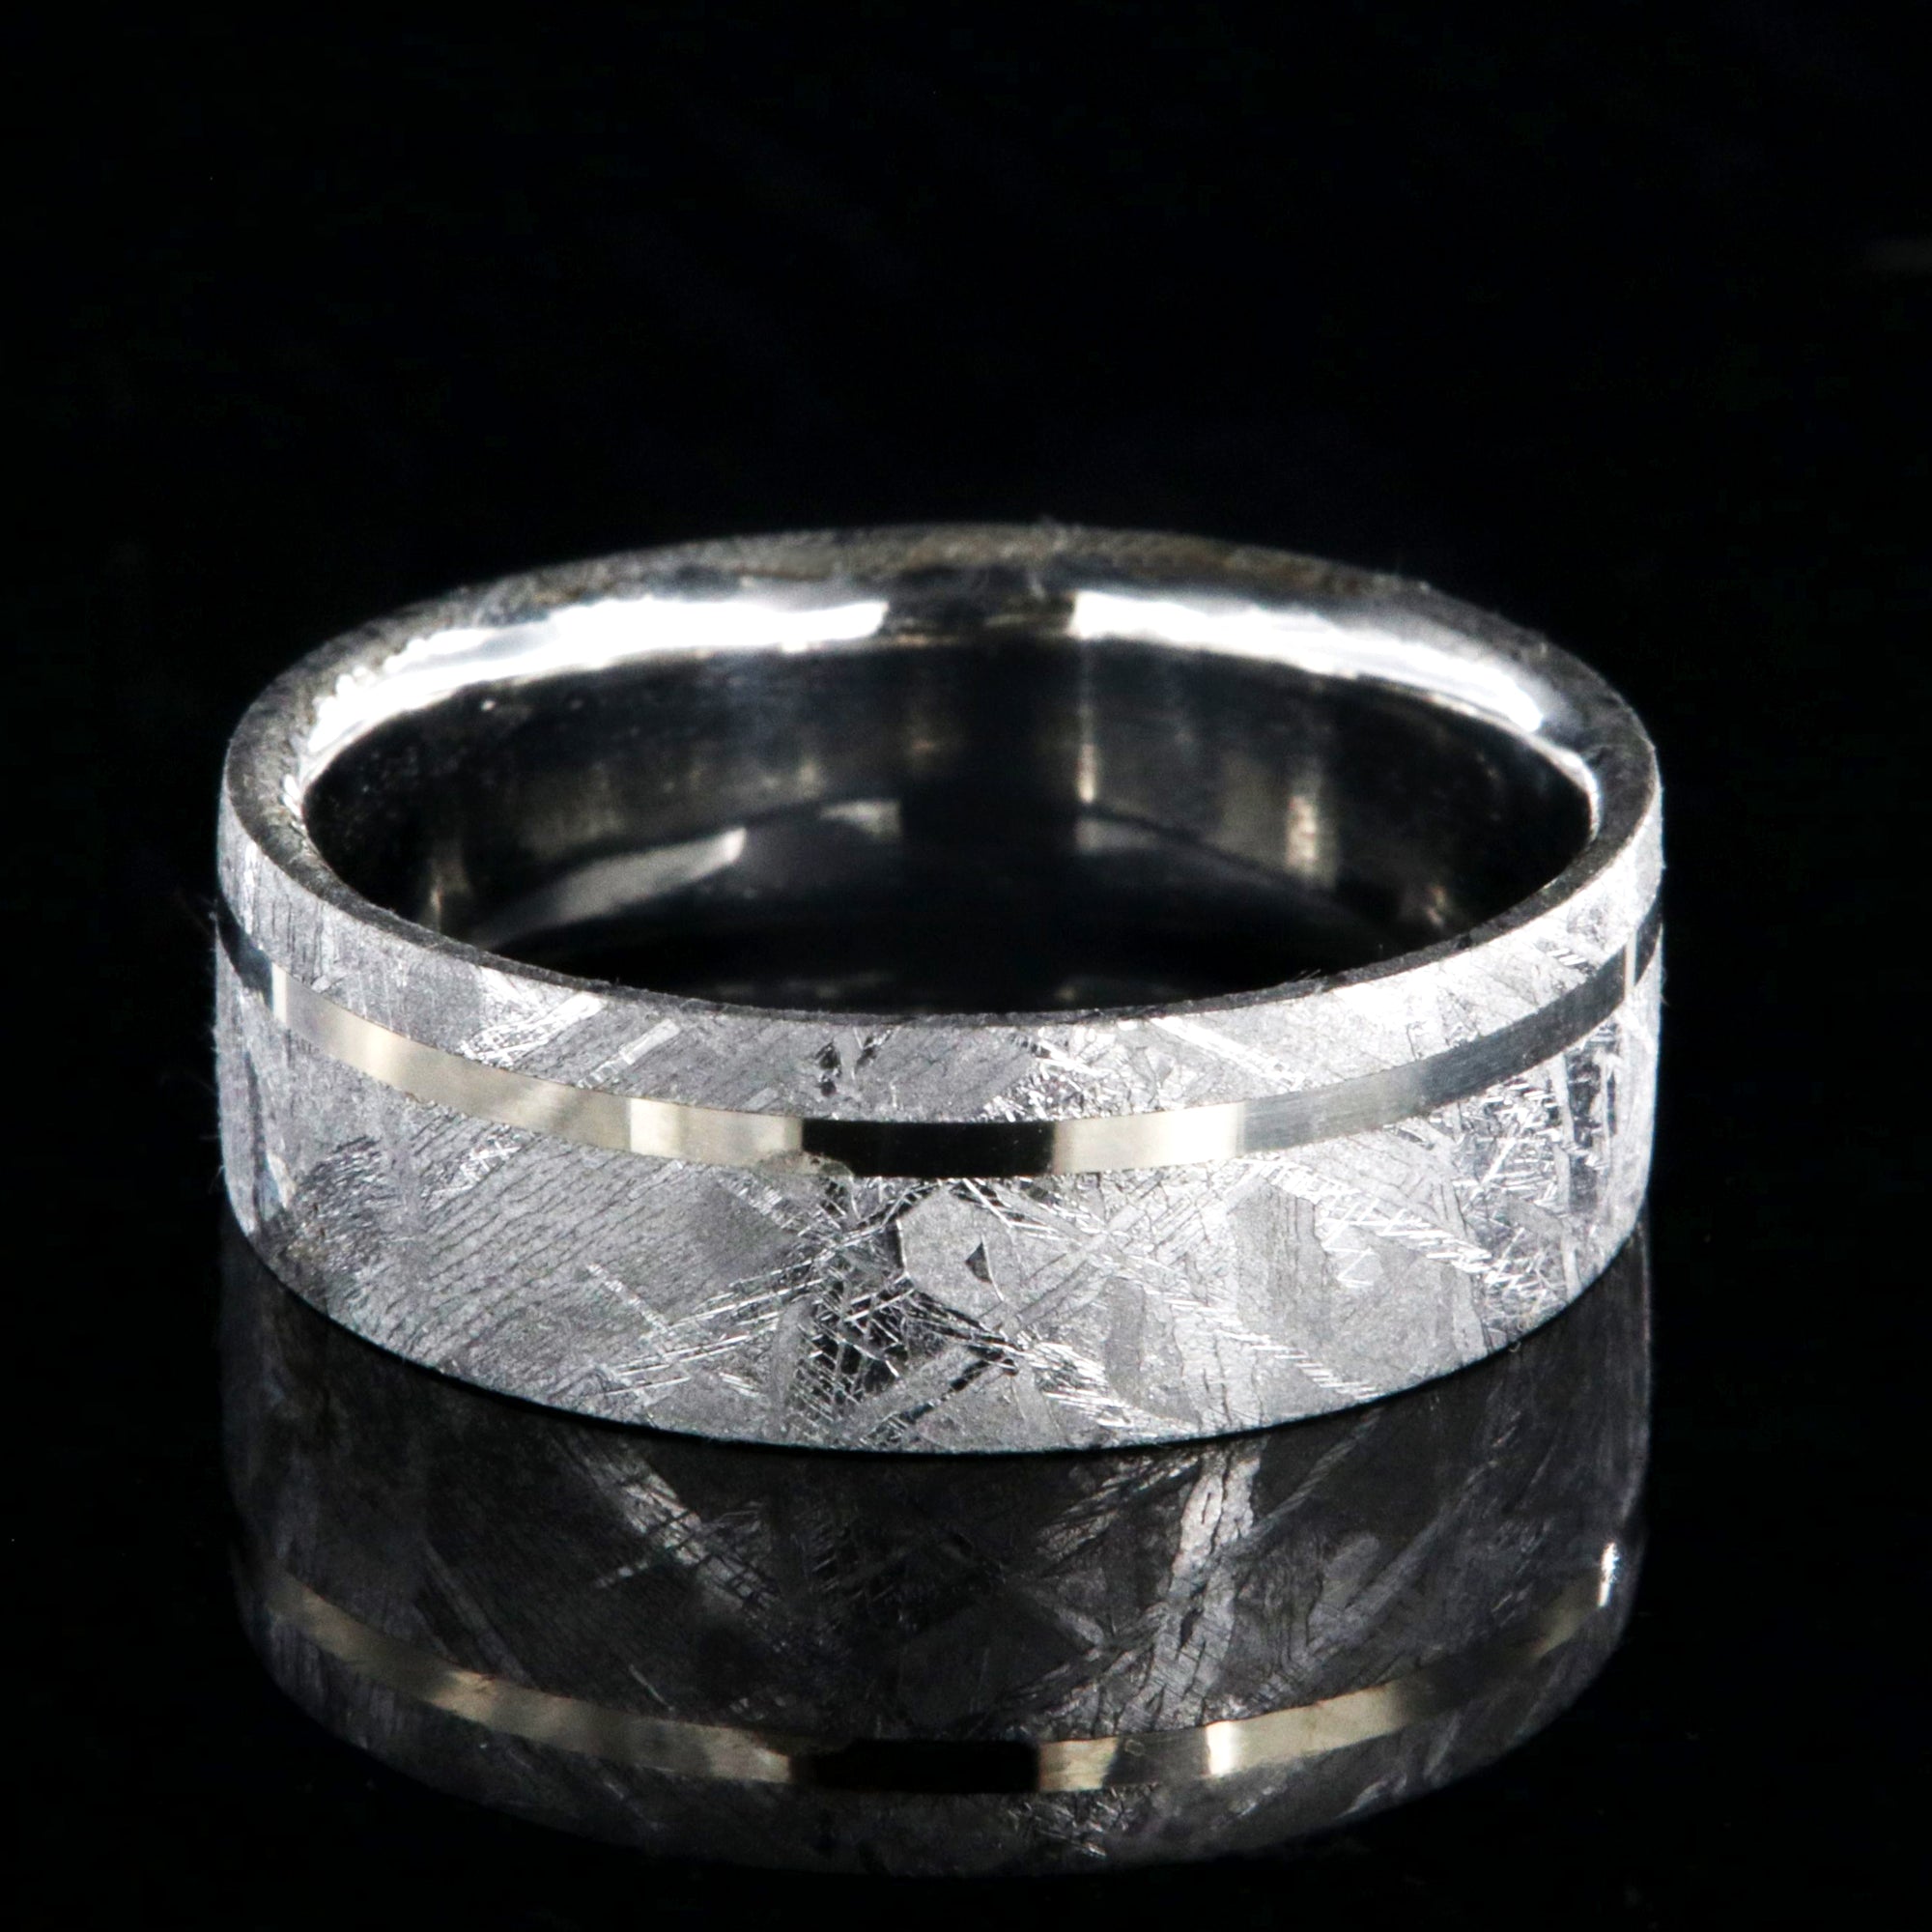 8mm wide men's meteorite wedding band with an off-centered white gold inlay, polished cobalt sleeve, and flat profile